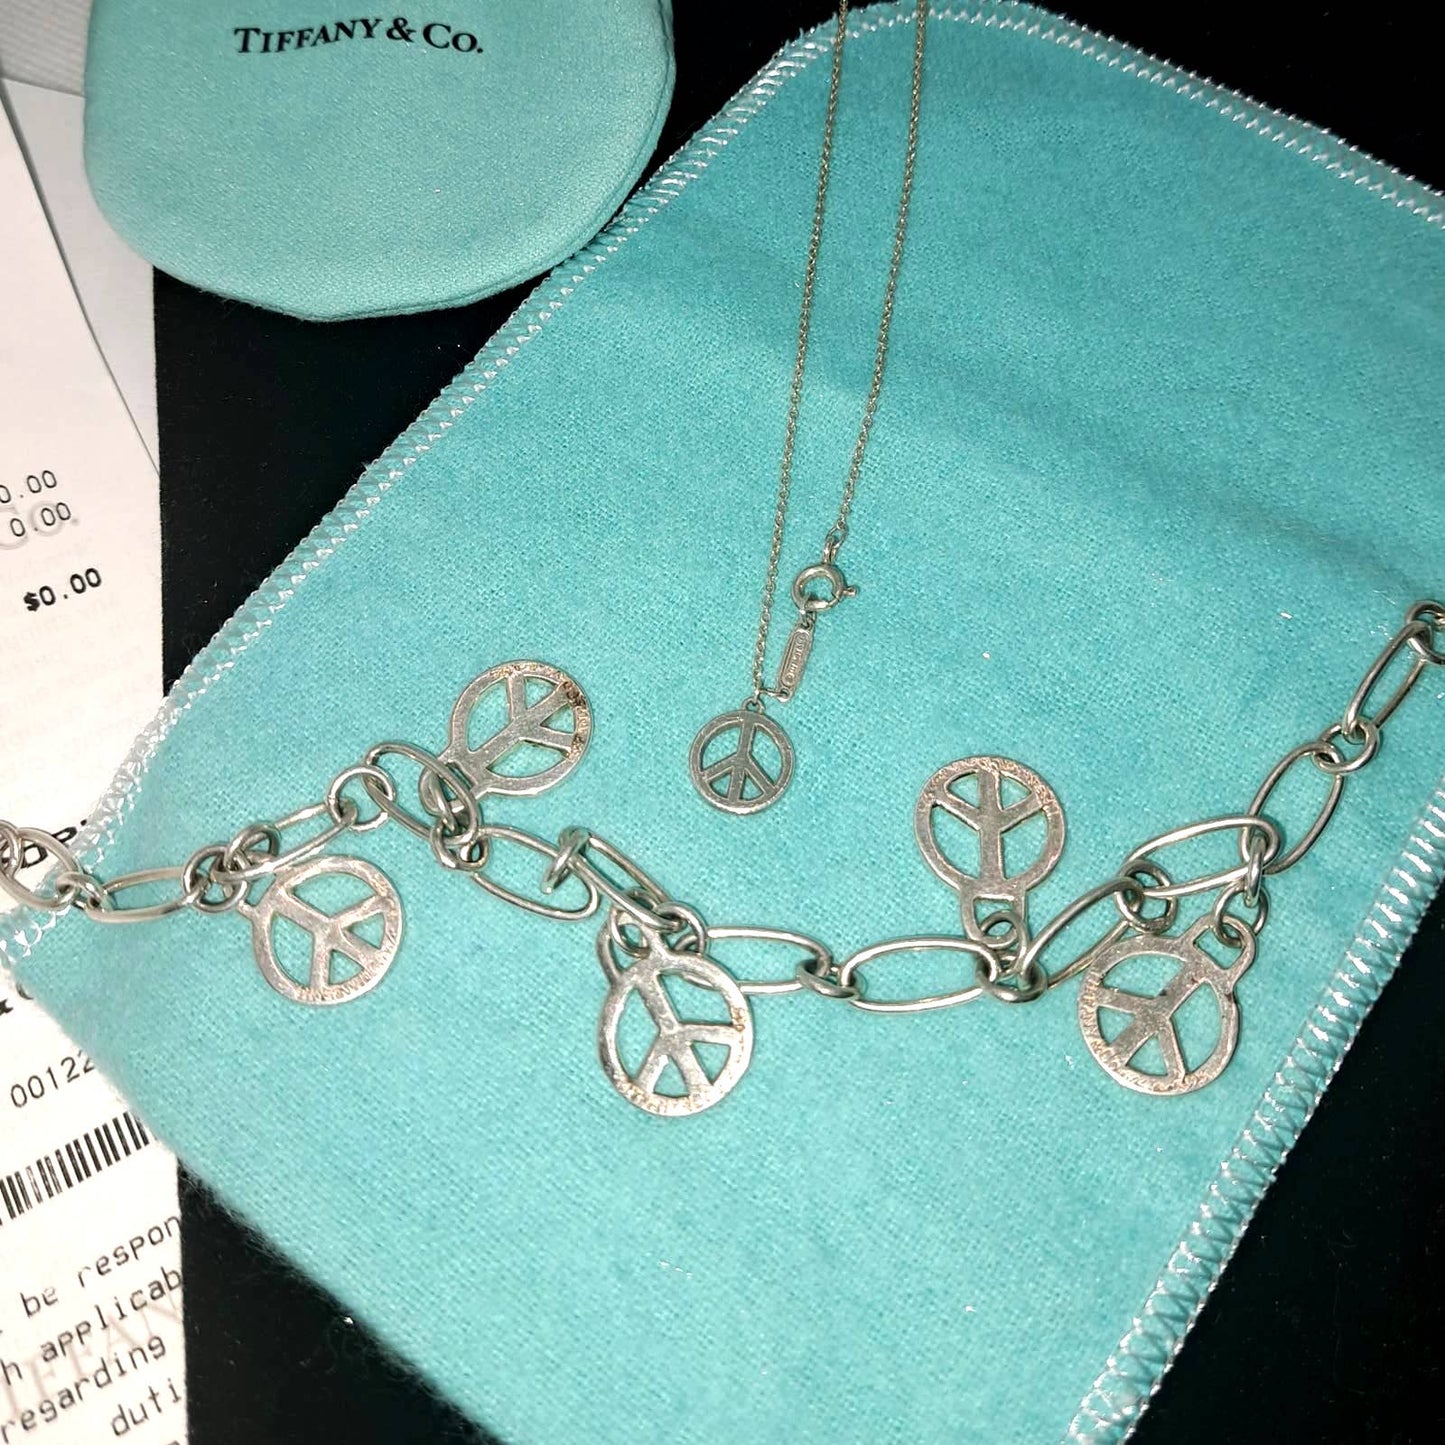 Tiffany PEACE SIGNS Bracelet & Necklace-COA's & Cleaning Tiffany Receipts